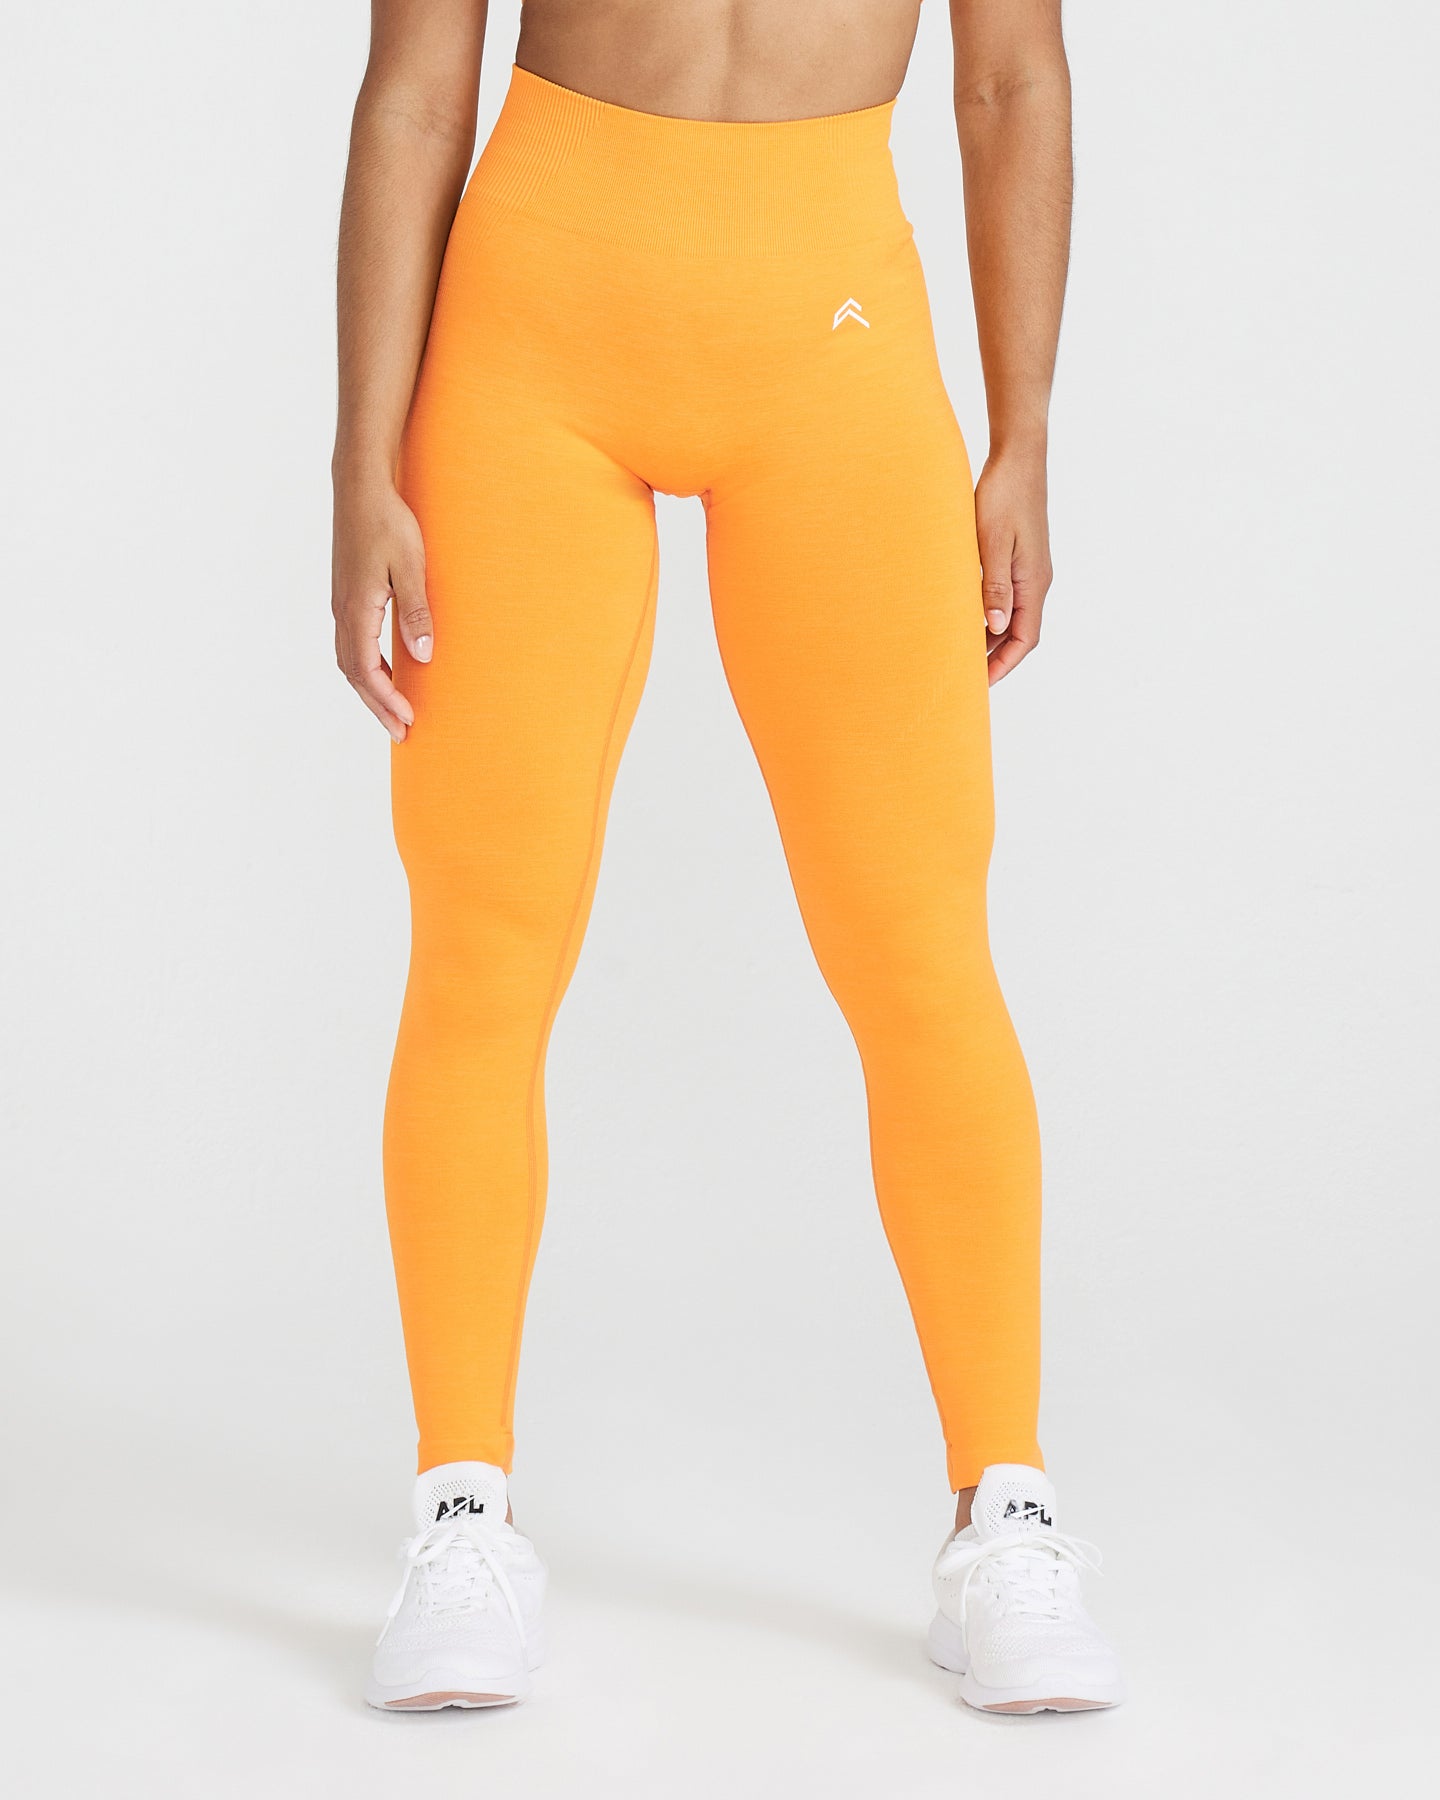 Oner Active Classic Seamless 2.0 Leggings Review - Gymfluencers